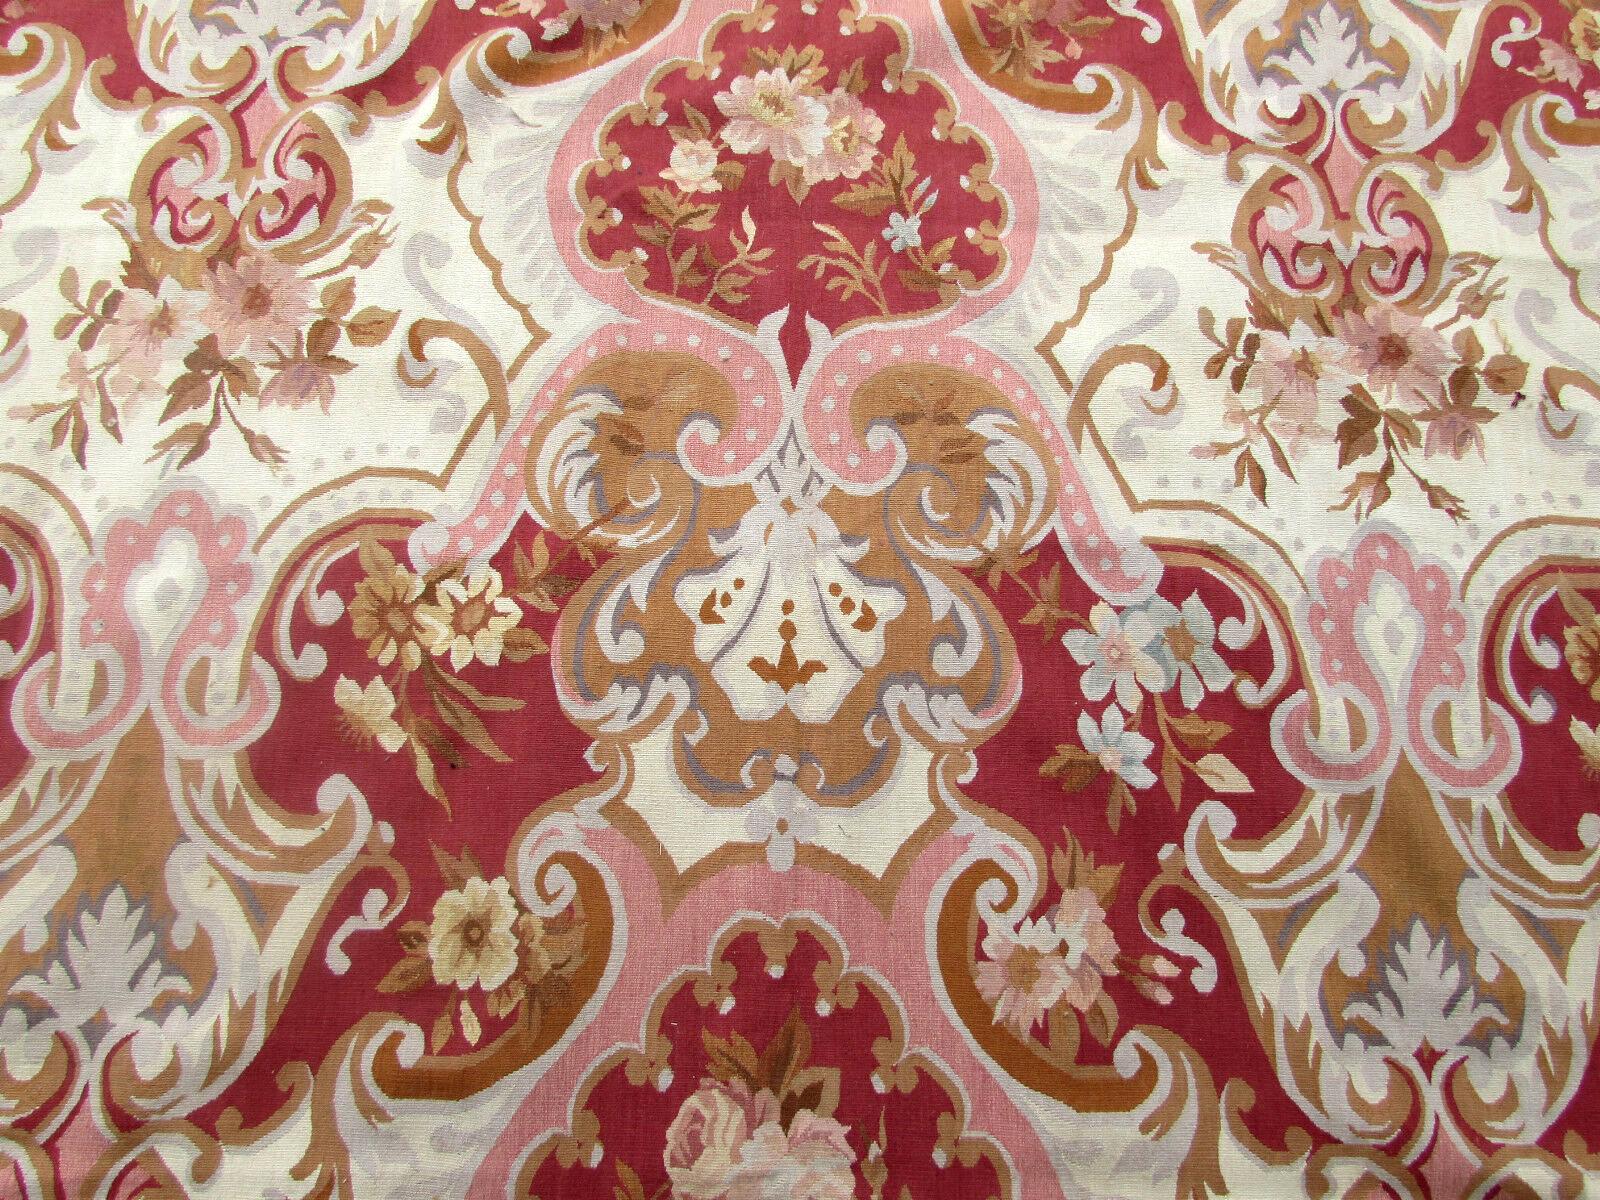 Handmade Vintage French Aubusson Rug 8.9' x 12', 1980s, 1Q37 For Sale 2